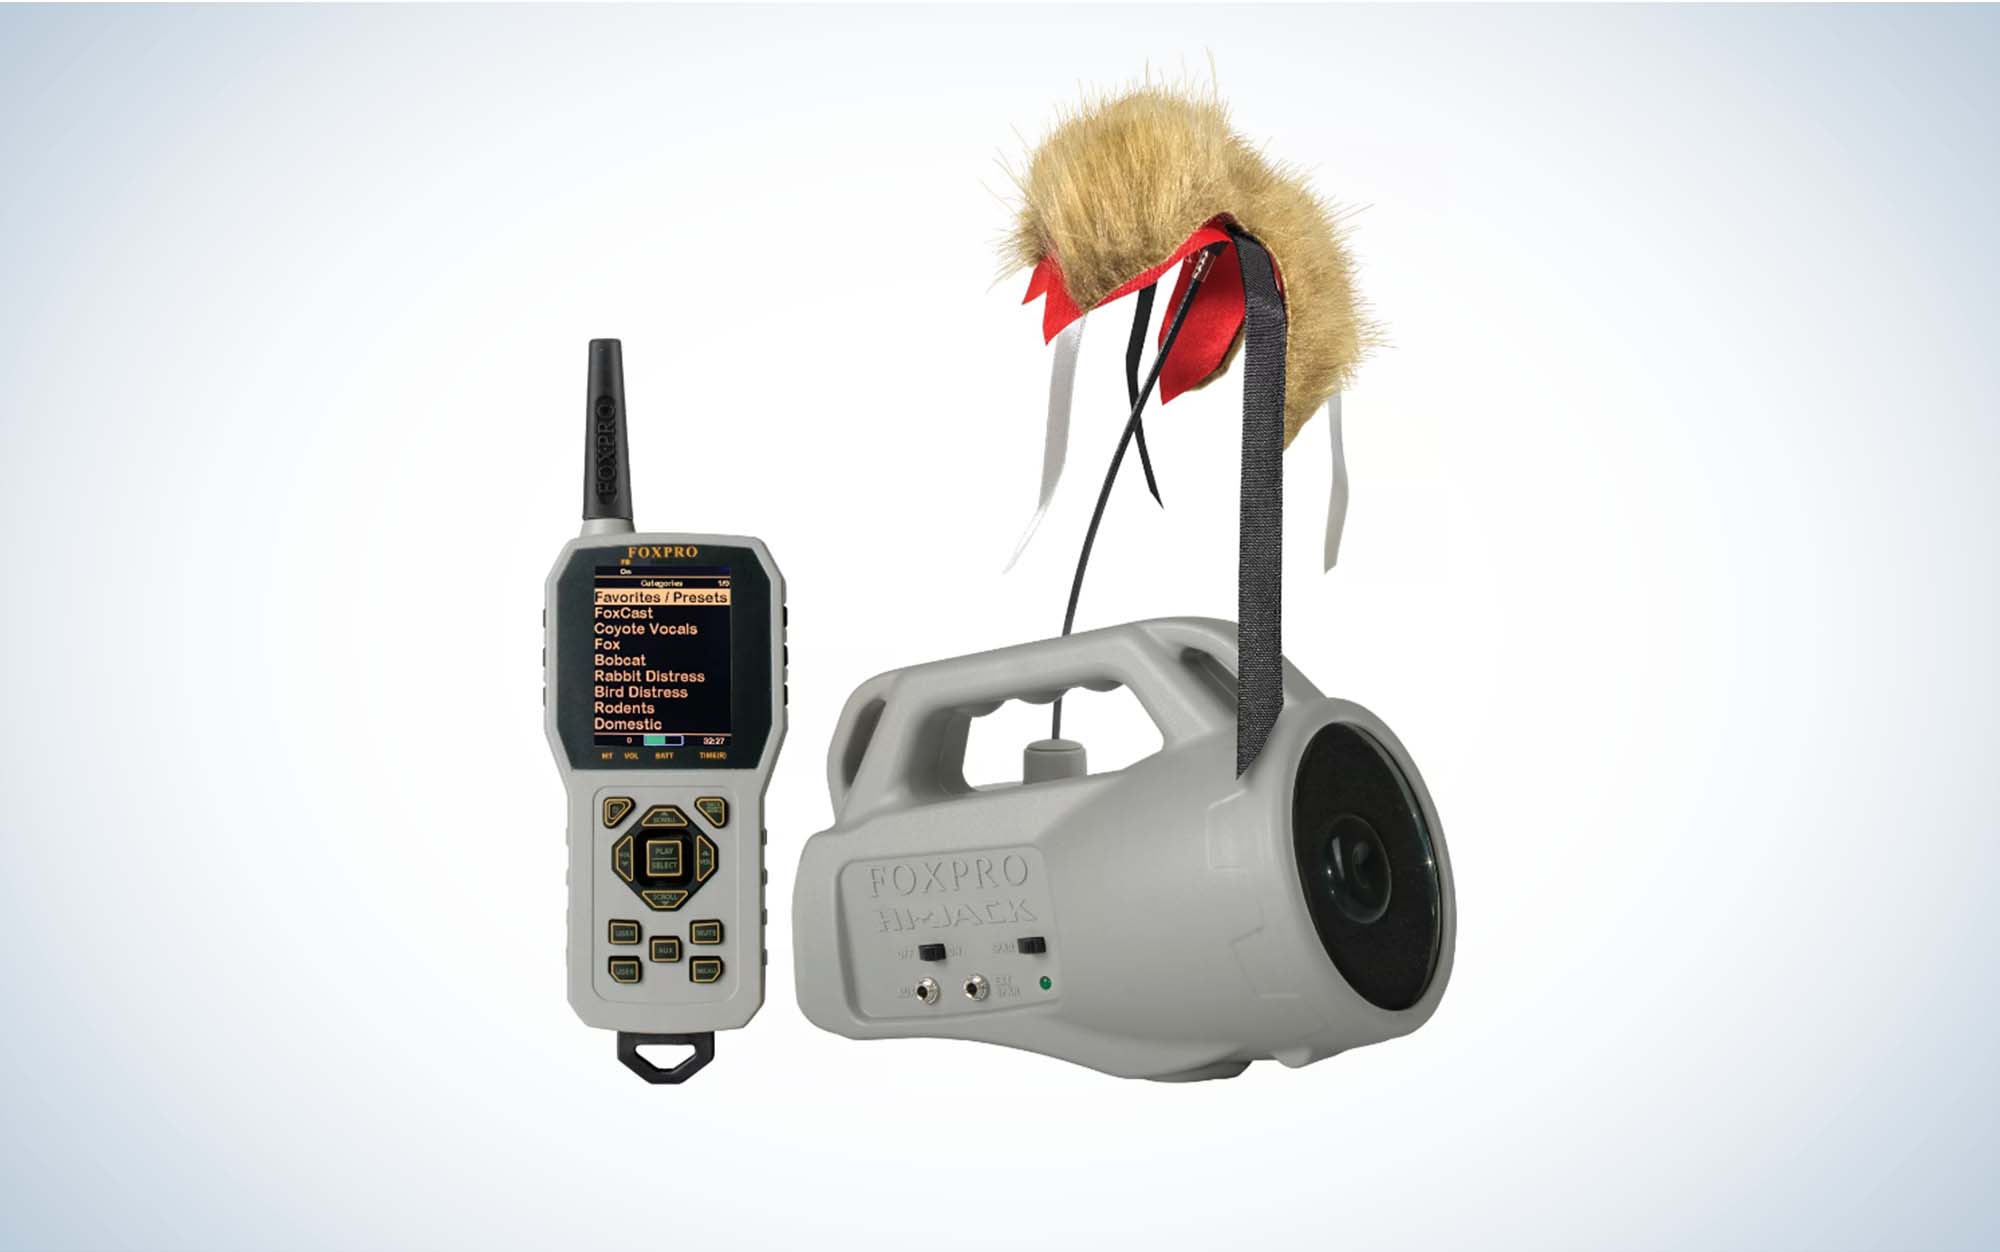 The FOXPRO Hi-Jack with TX1000 remote is the best remote coyote call.